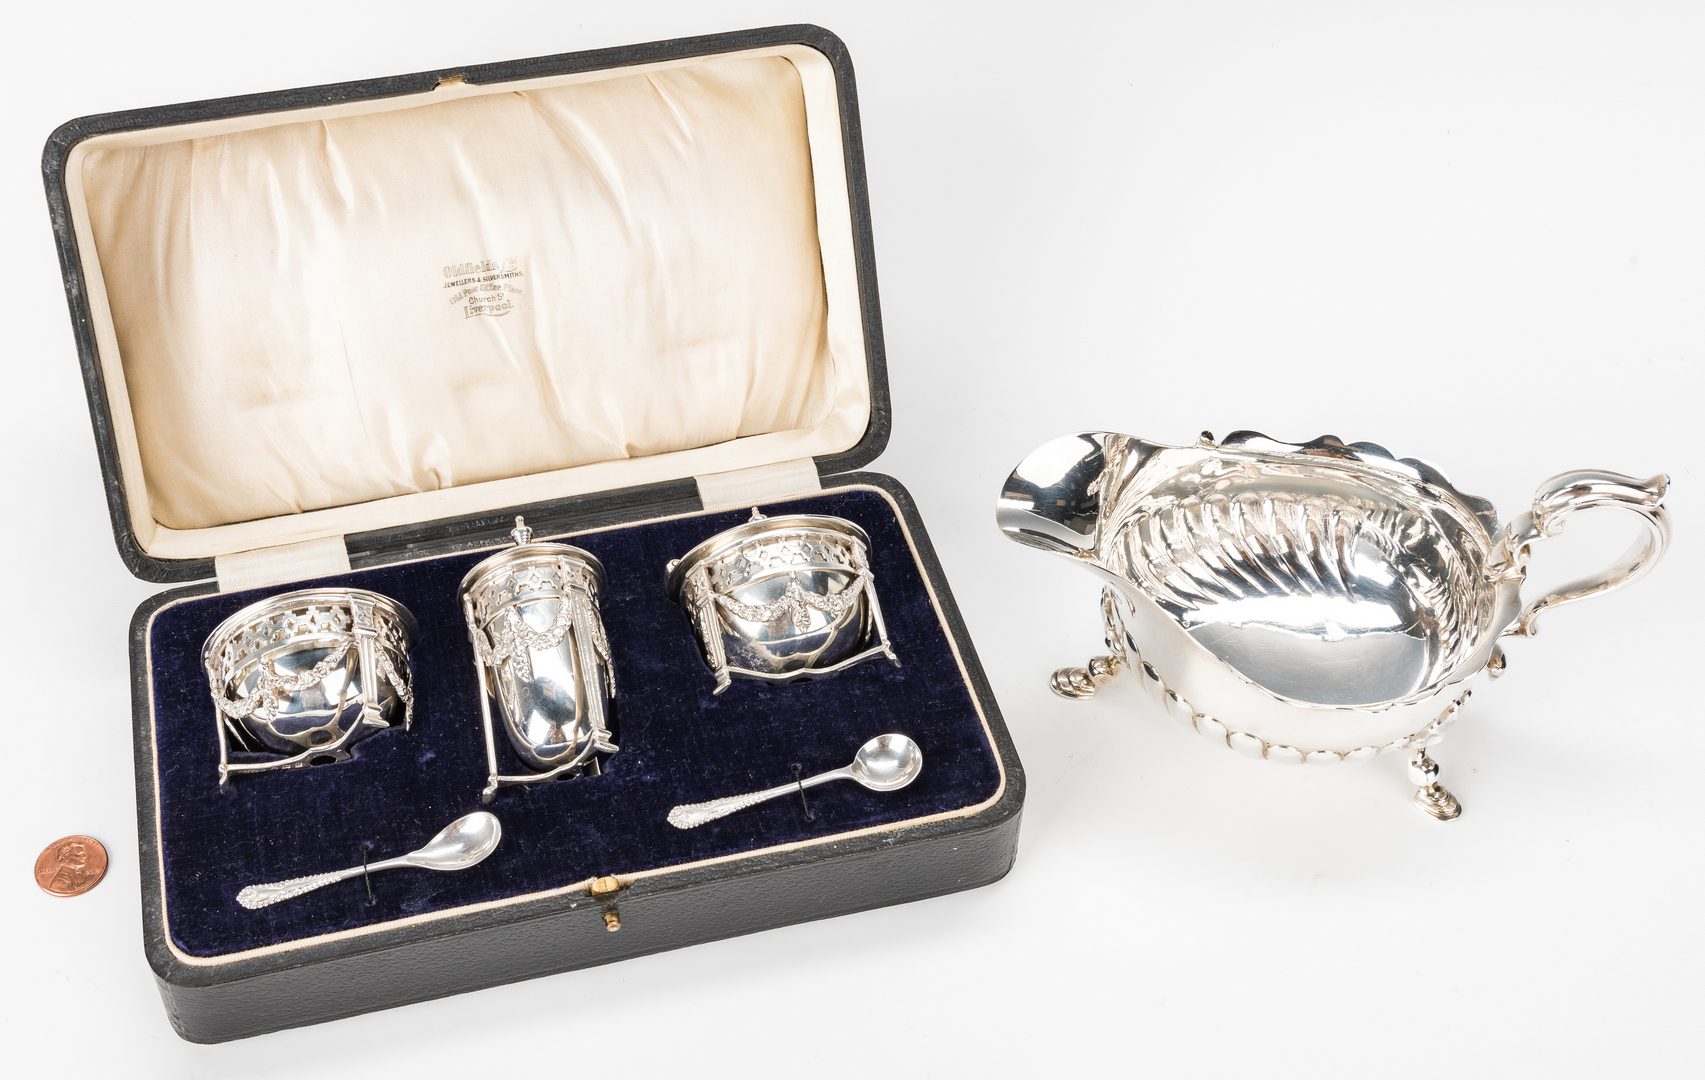 Lot 214: Edwardian Cased Sterling Condiment Set and Sauce Boat